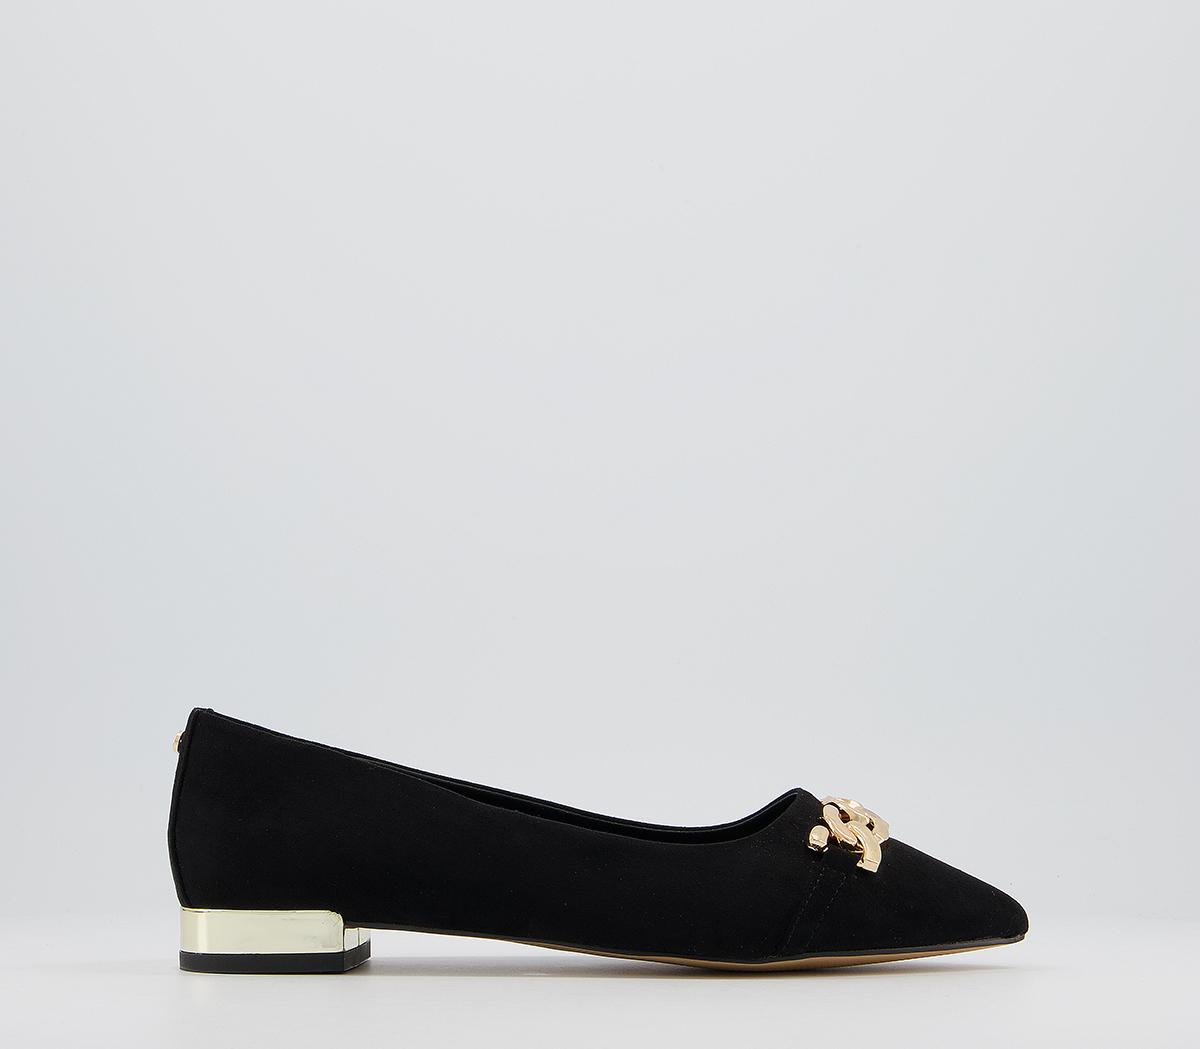 OFFICEFairness Feature Pointed Flat ShoesBlack